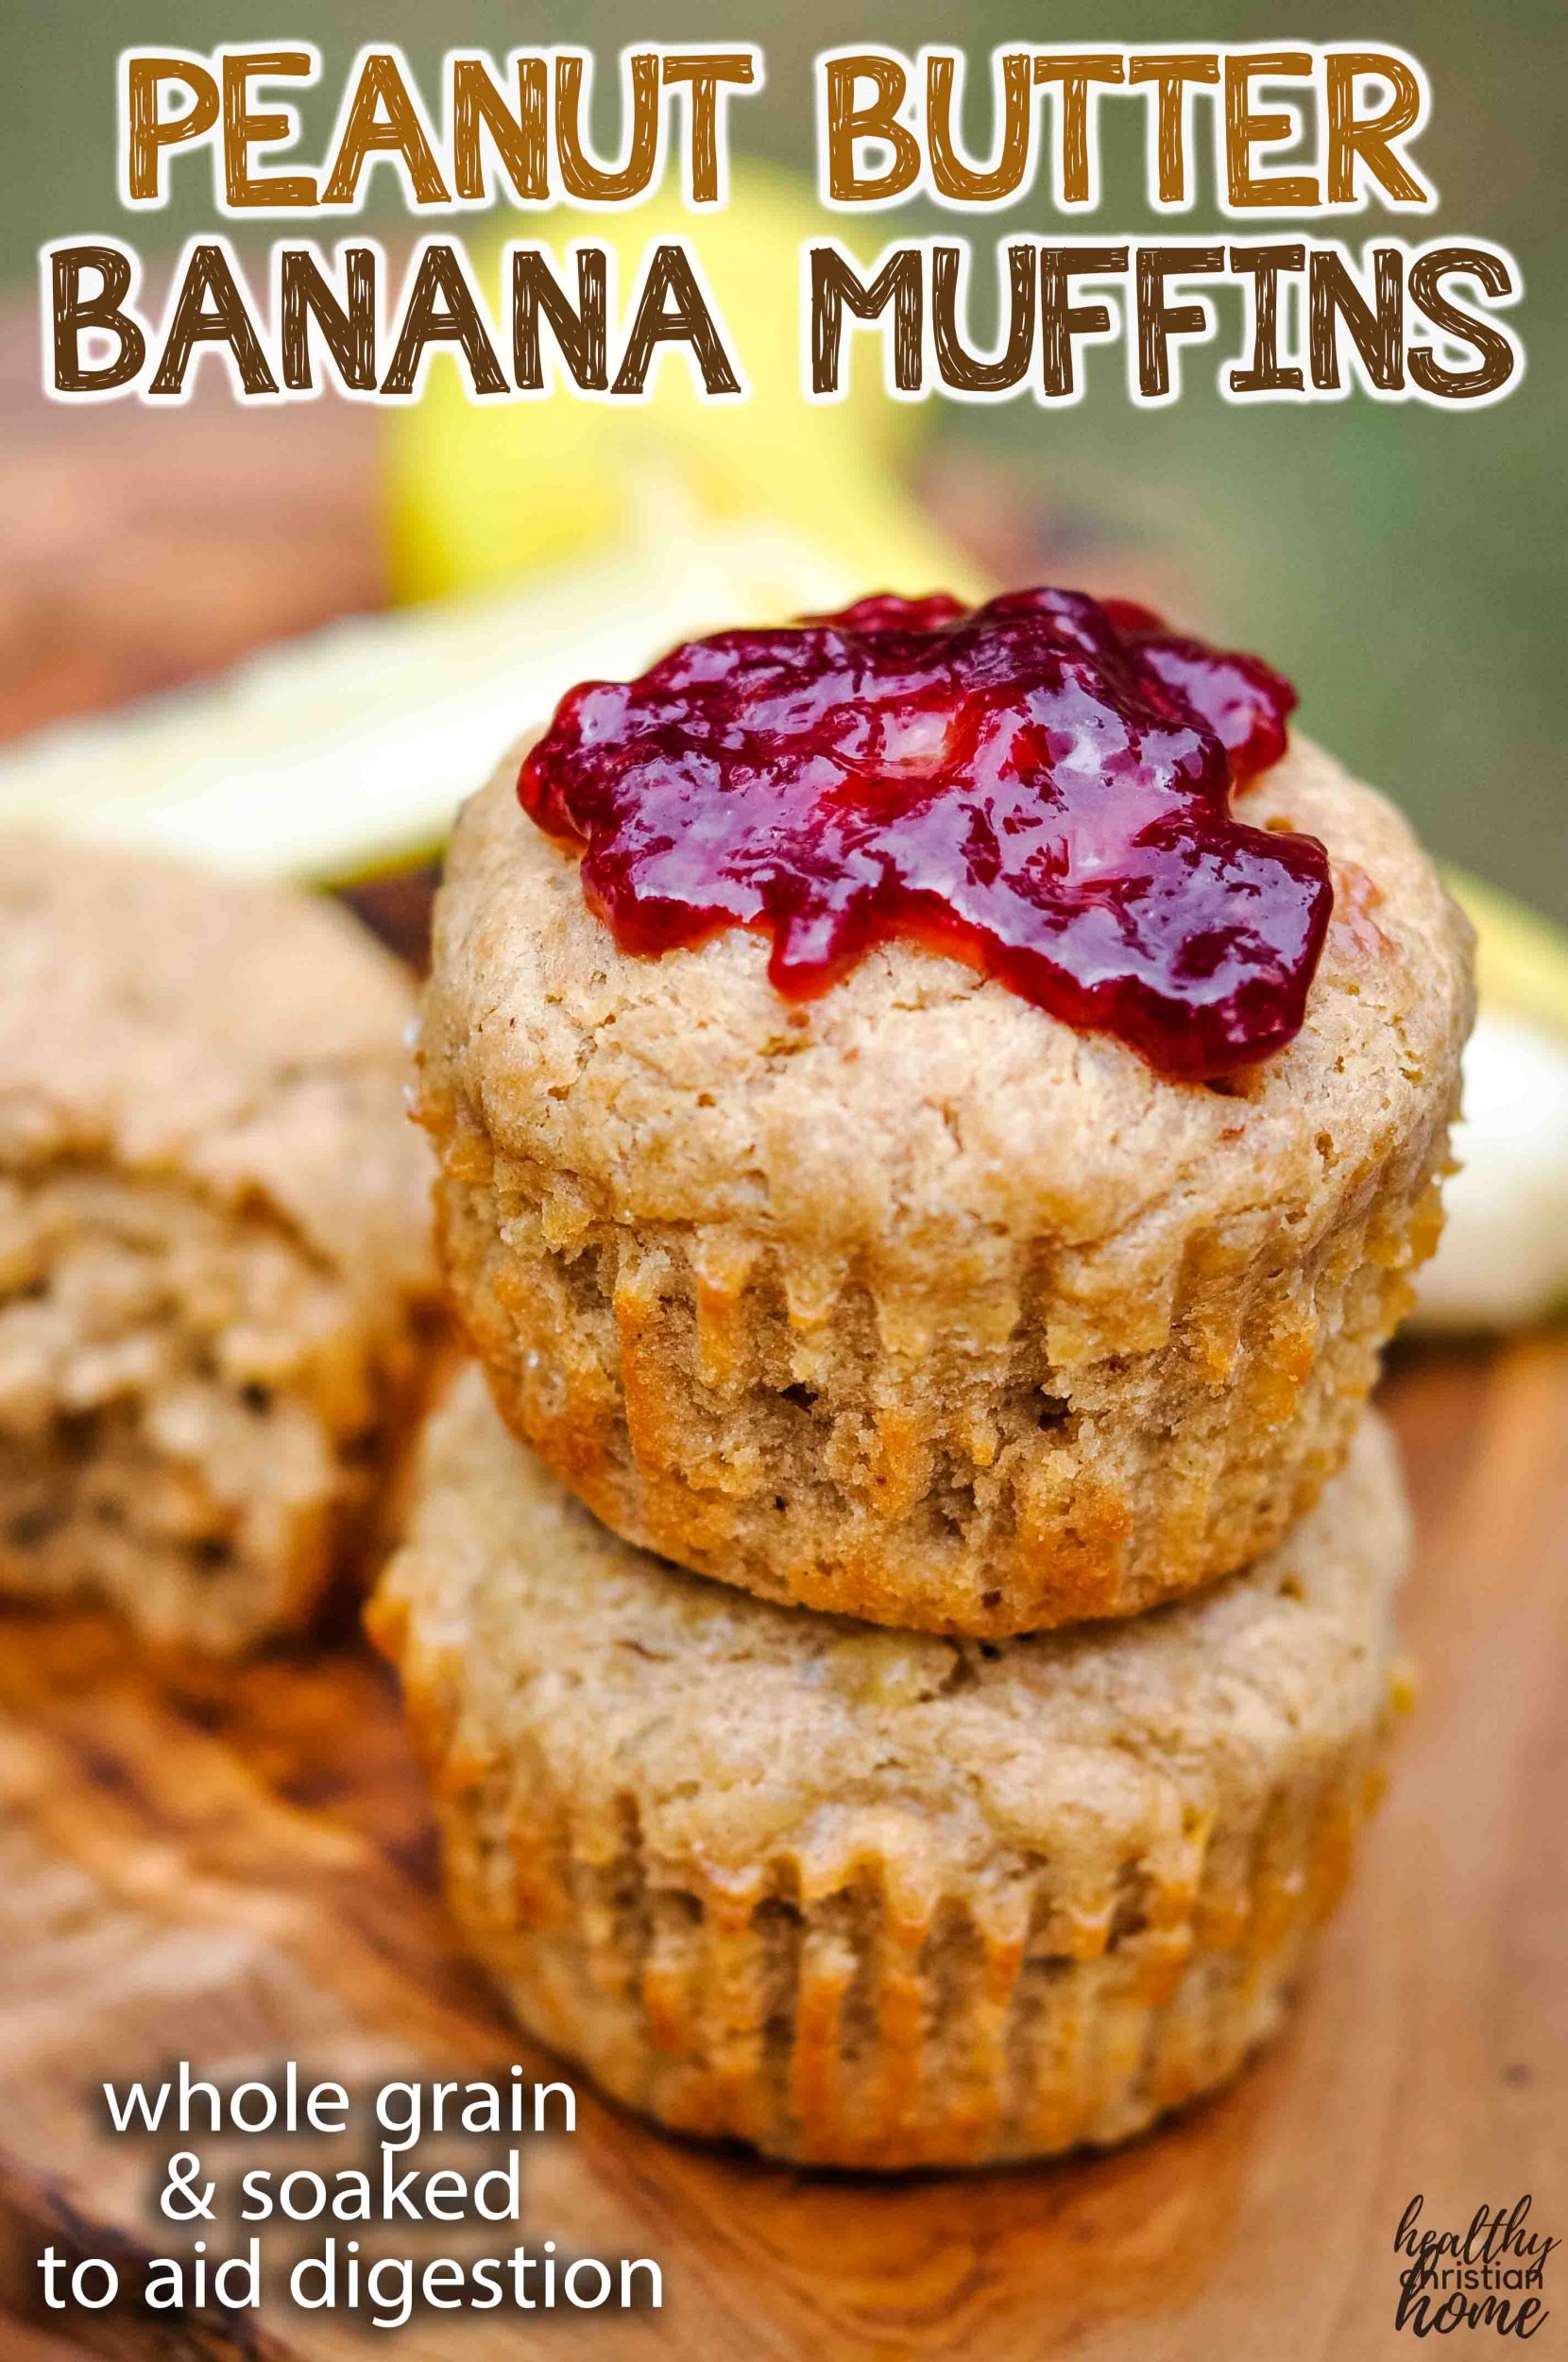 Healthy peanut butter banana muffins title image.